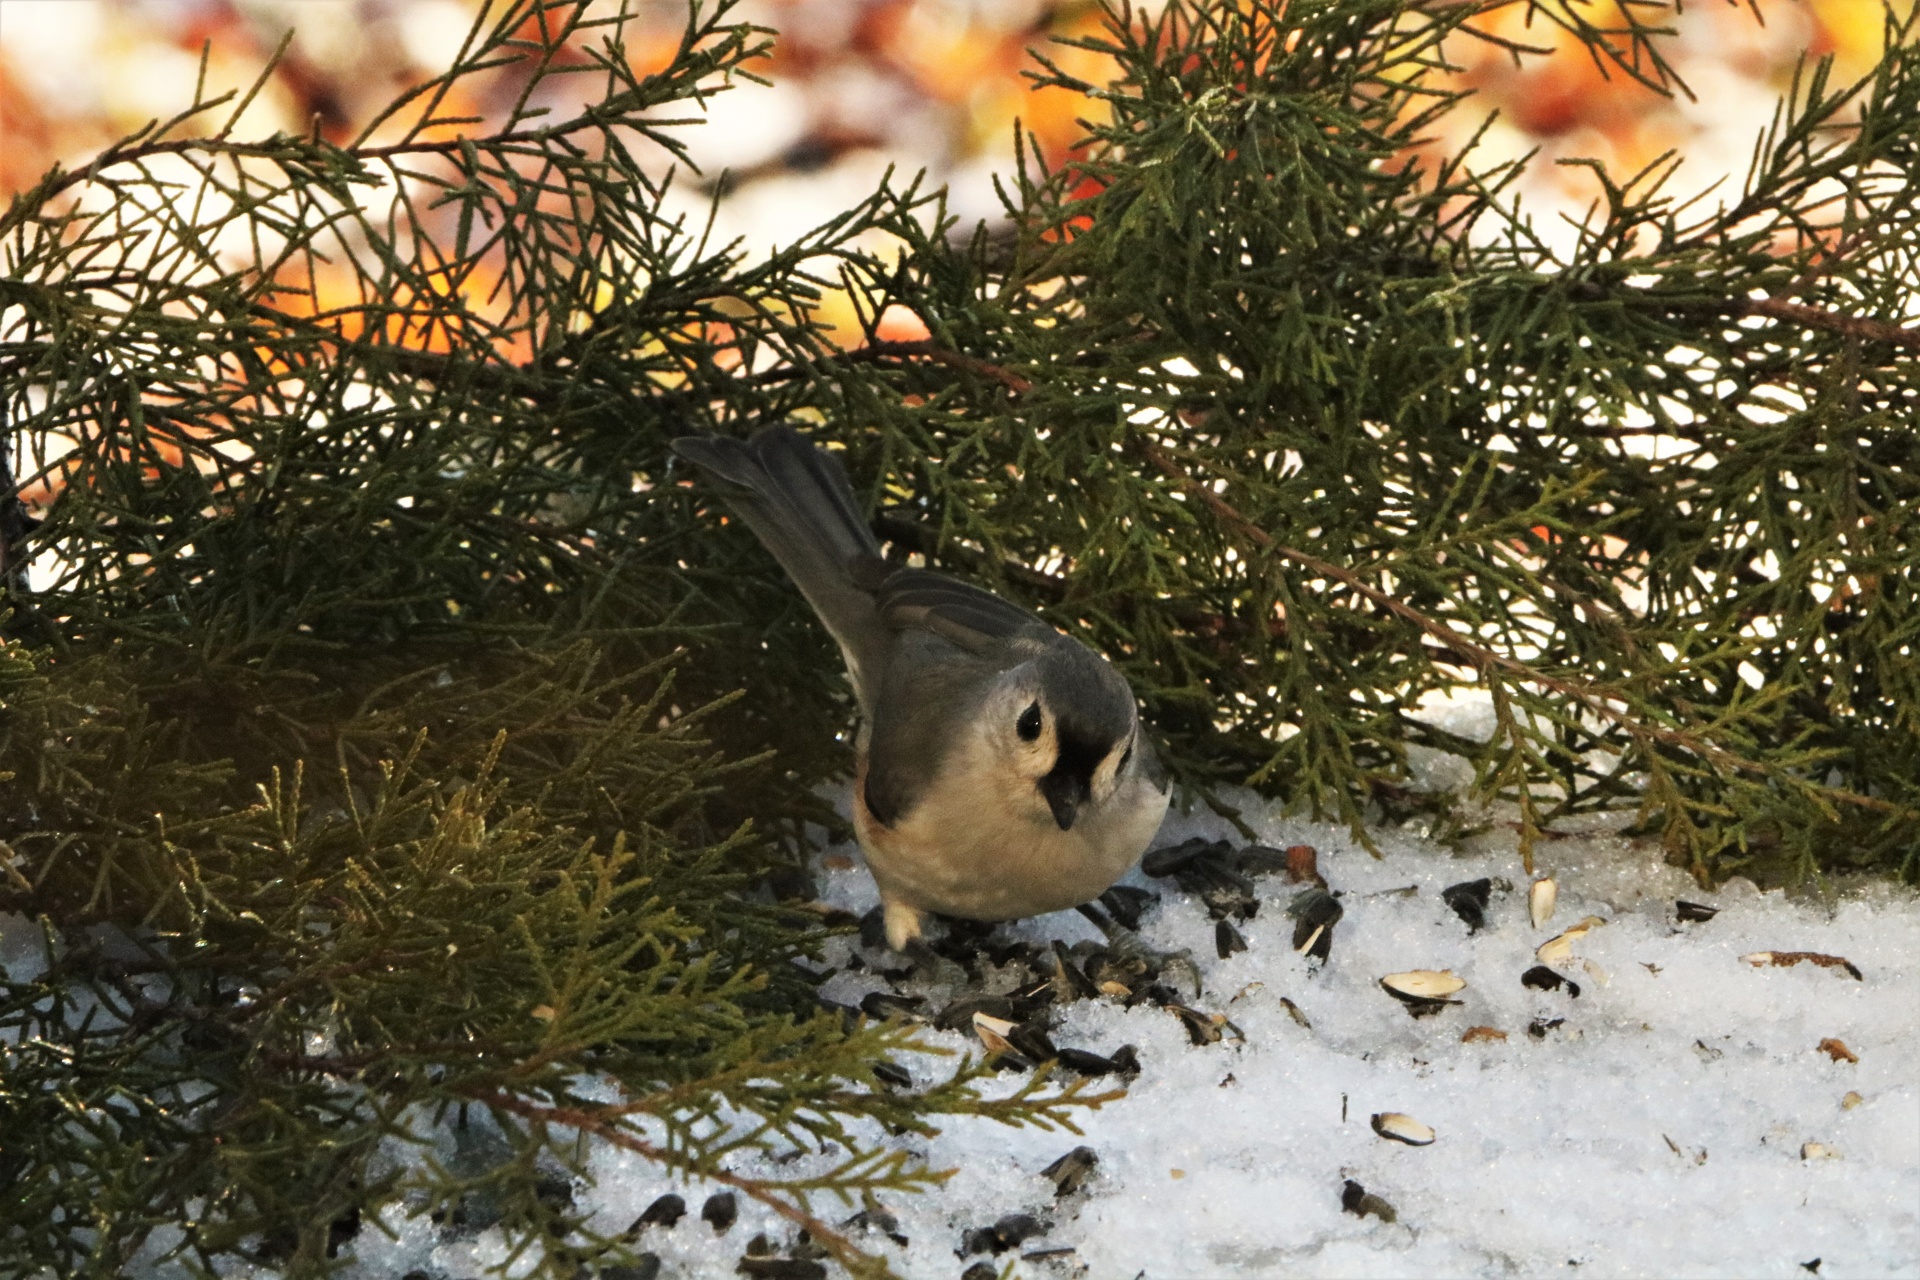 A cute little tufted titmouse bird is standing in snow eating sunflower seeds among cedar tree branches.